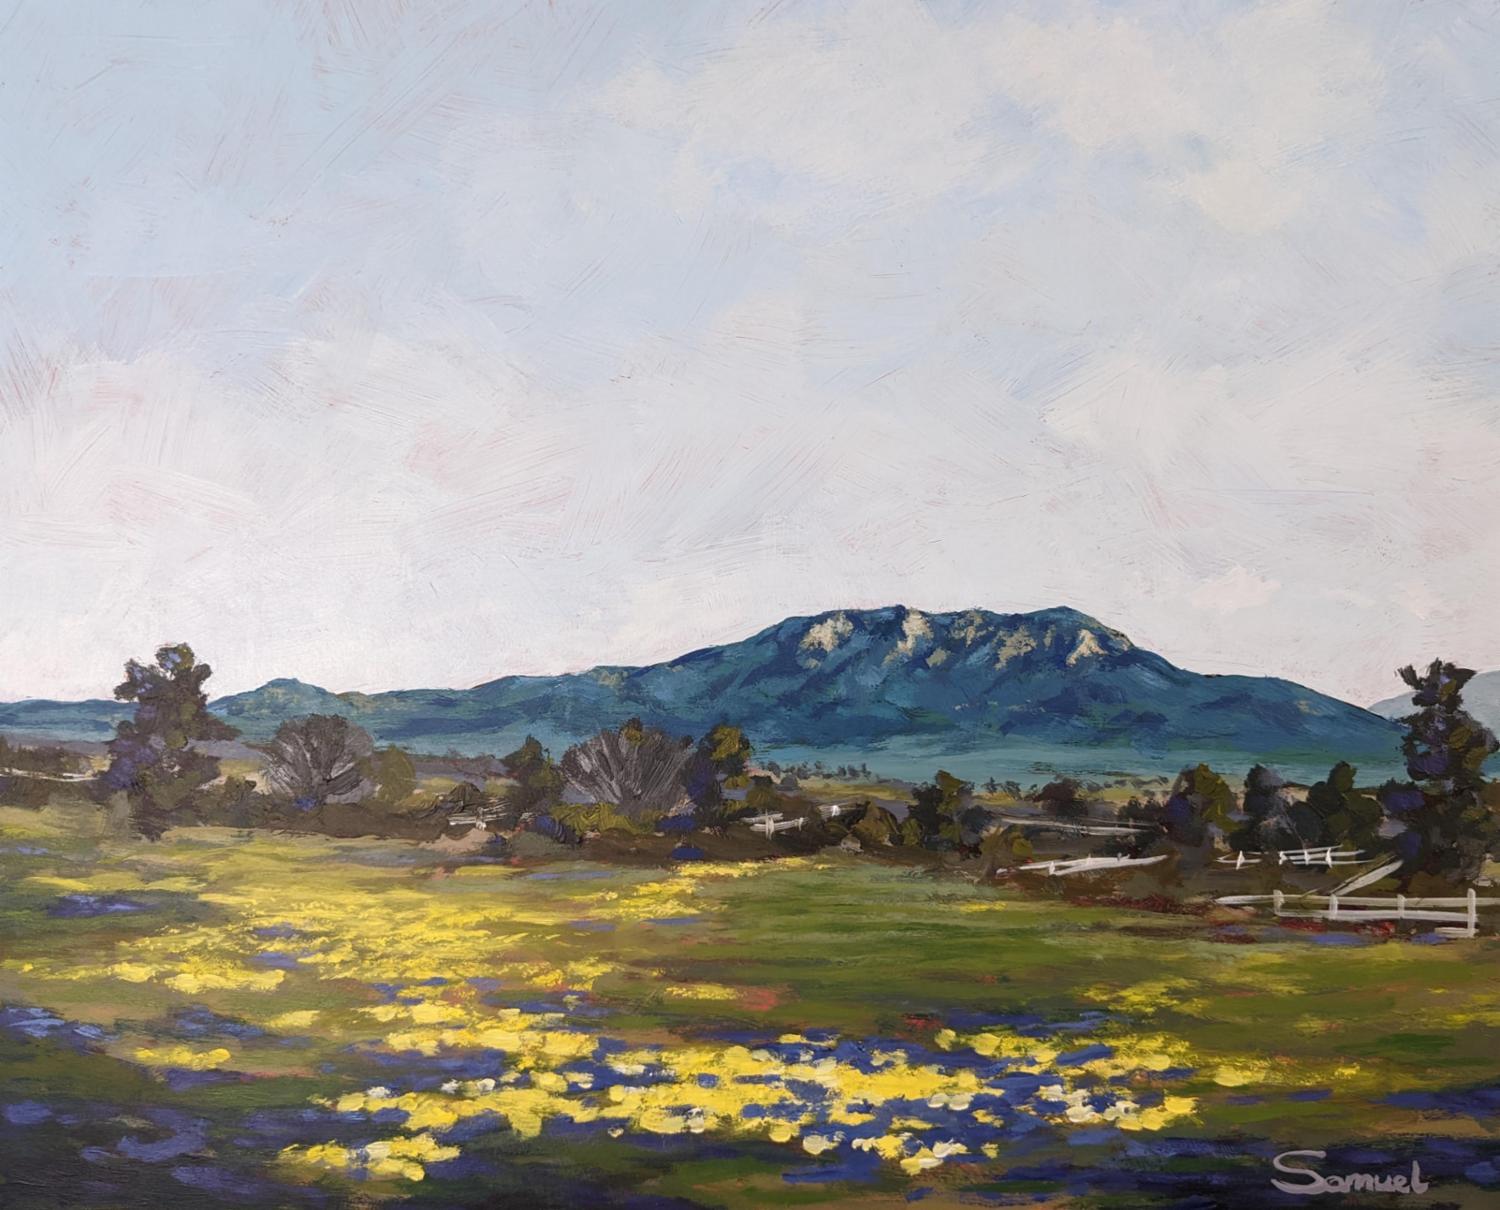 Majestic Cahuilla  Mountain and Spring Blossoms, Original Painting